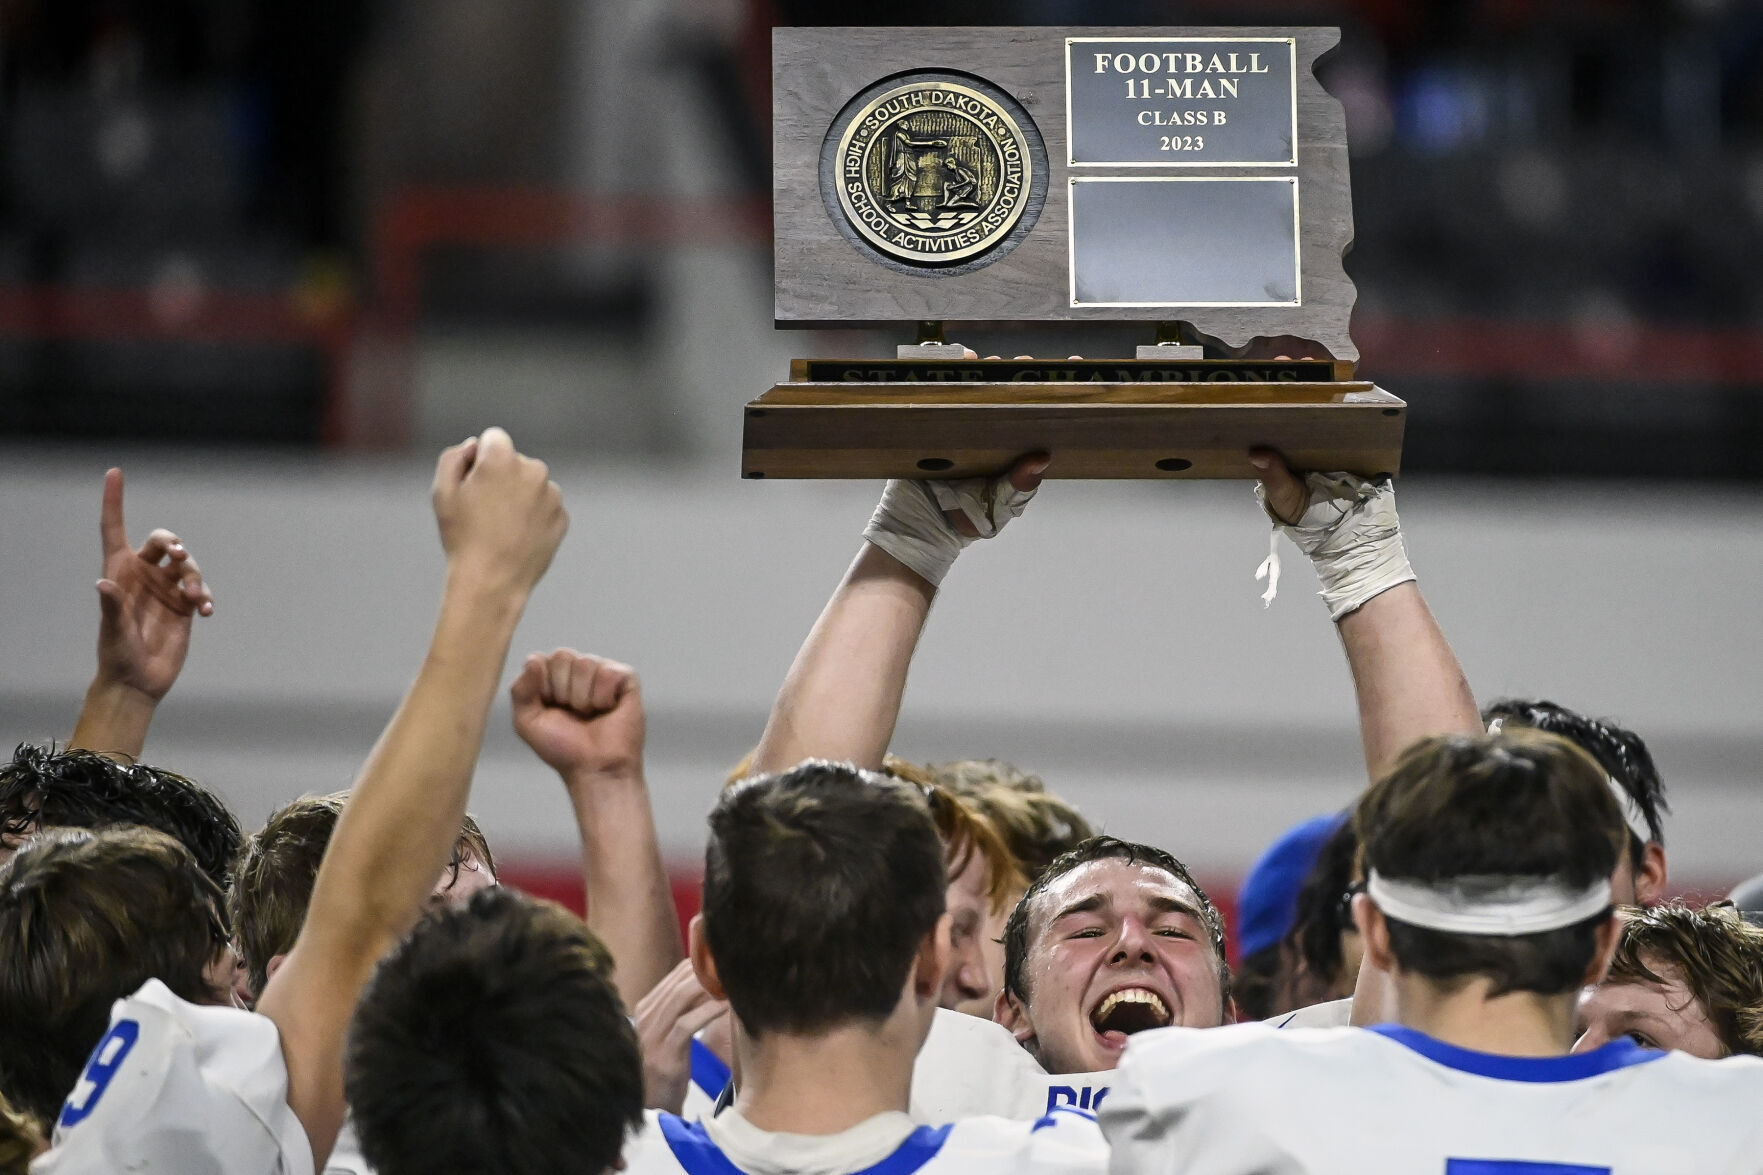 Hot Springs Football Team Secures Historic State Championship Victory Against Elk Point-Jefferson